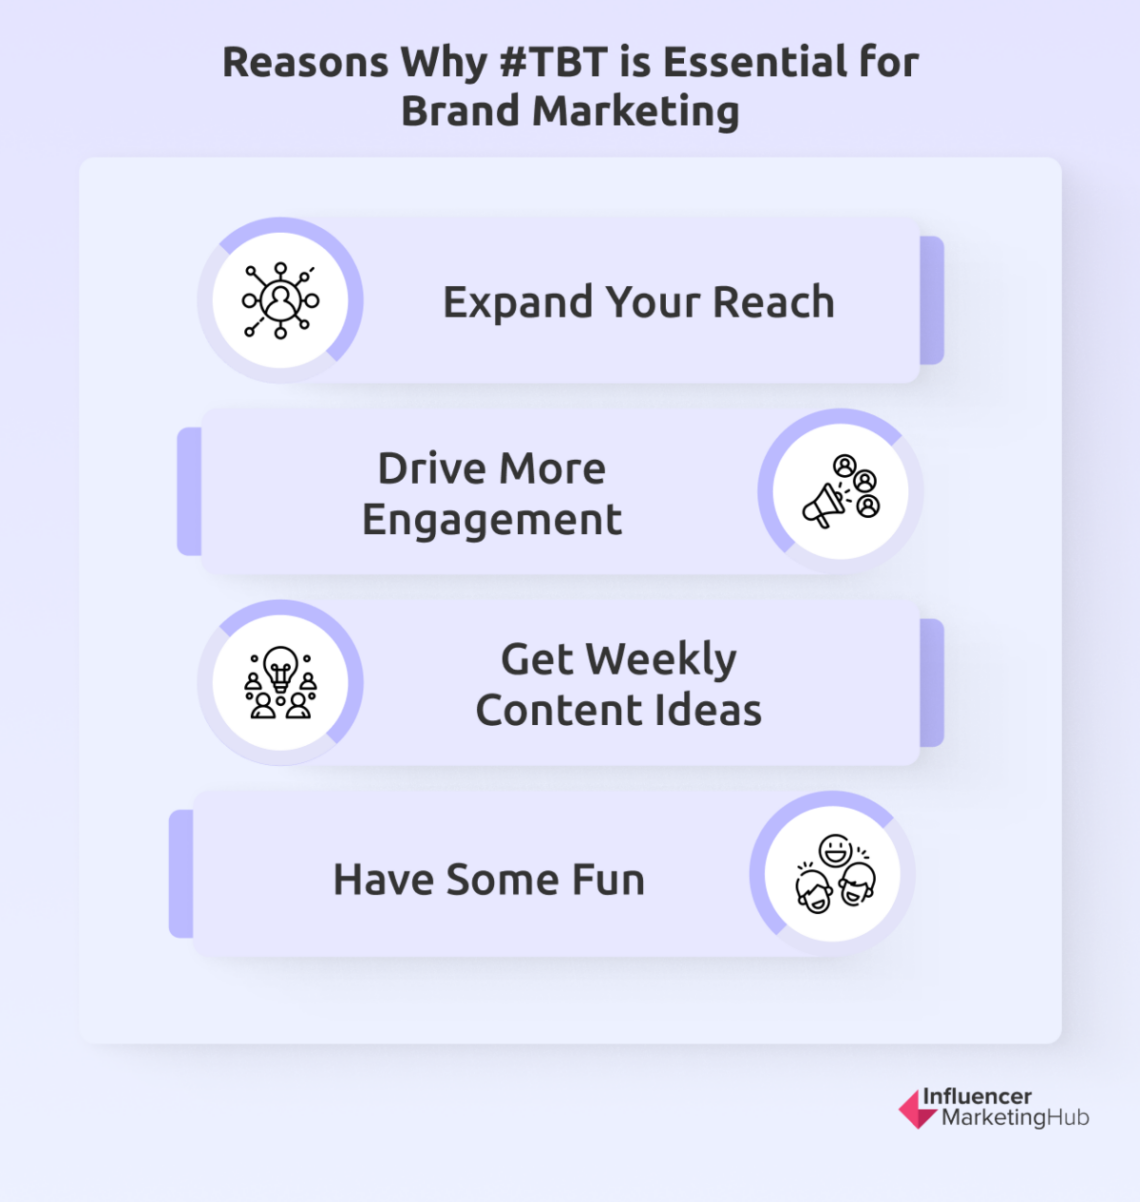 How to Use Throwback Thursday (TBT) to Grow Your Brand on Social